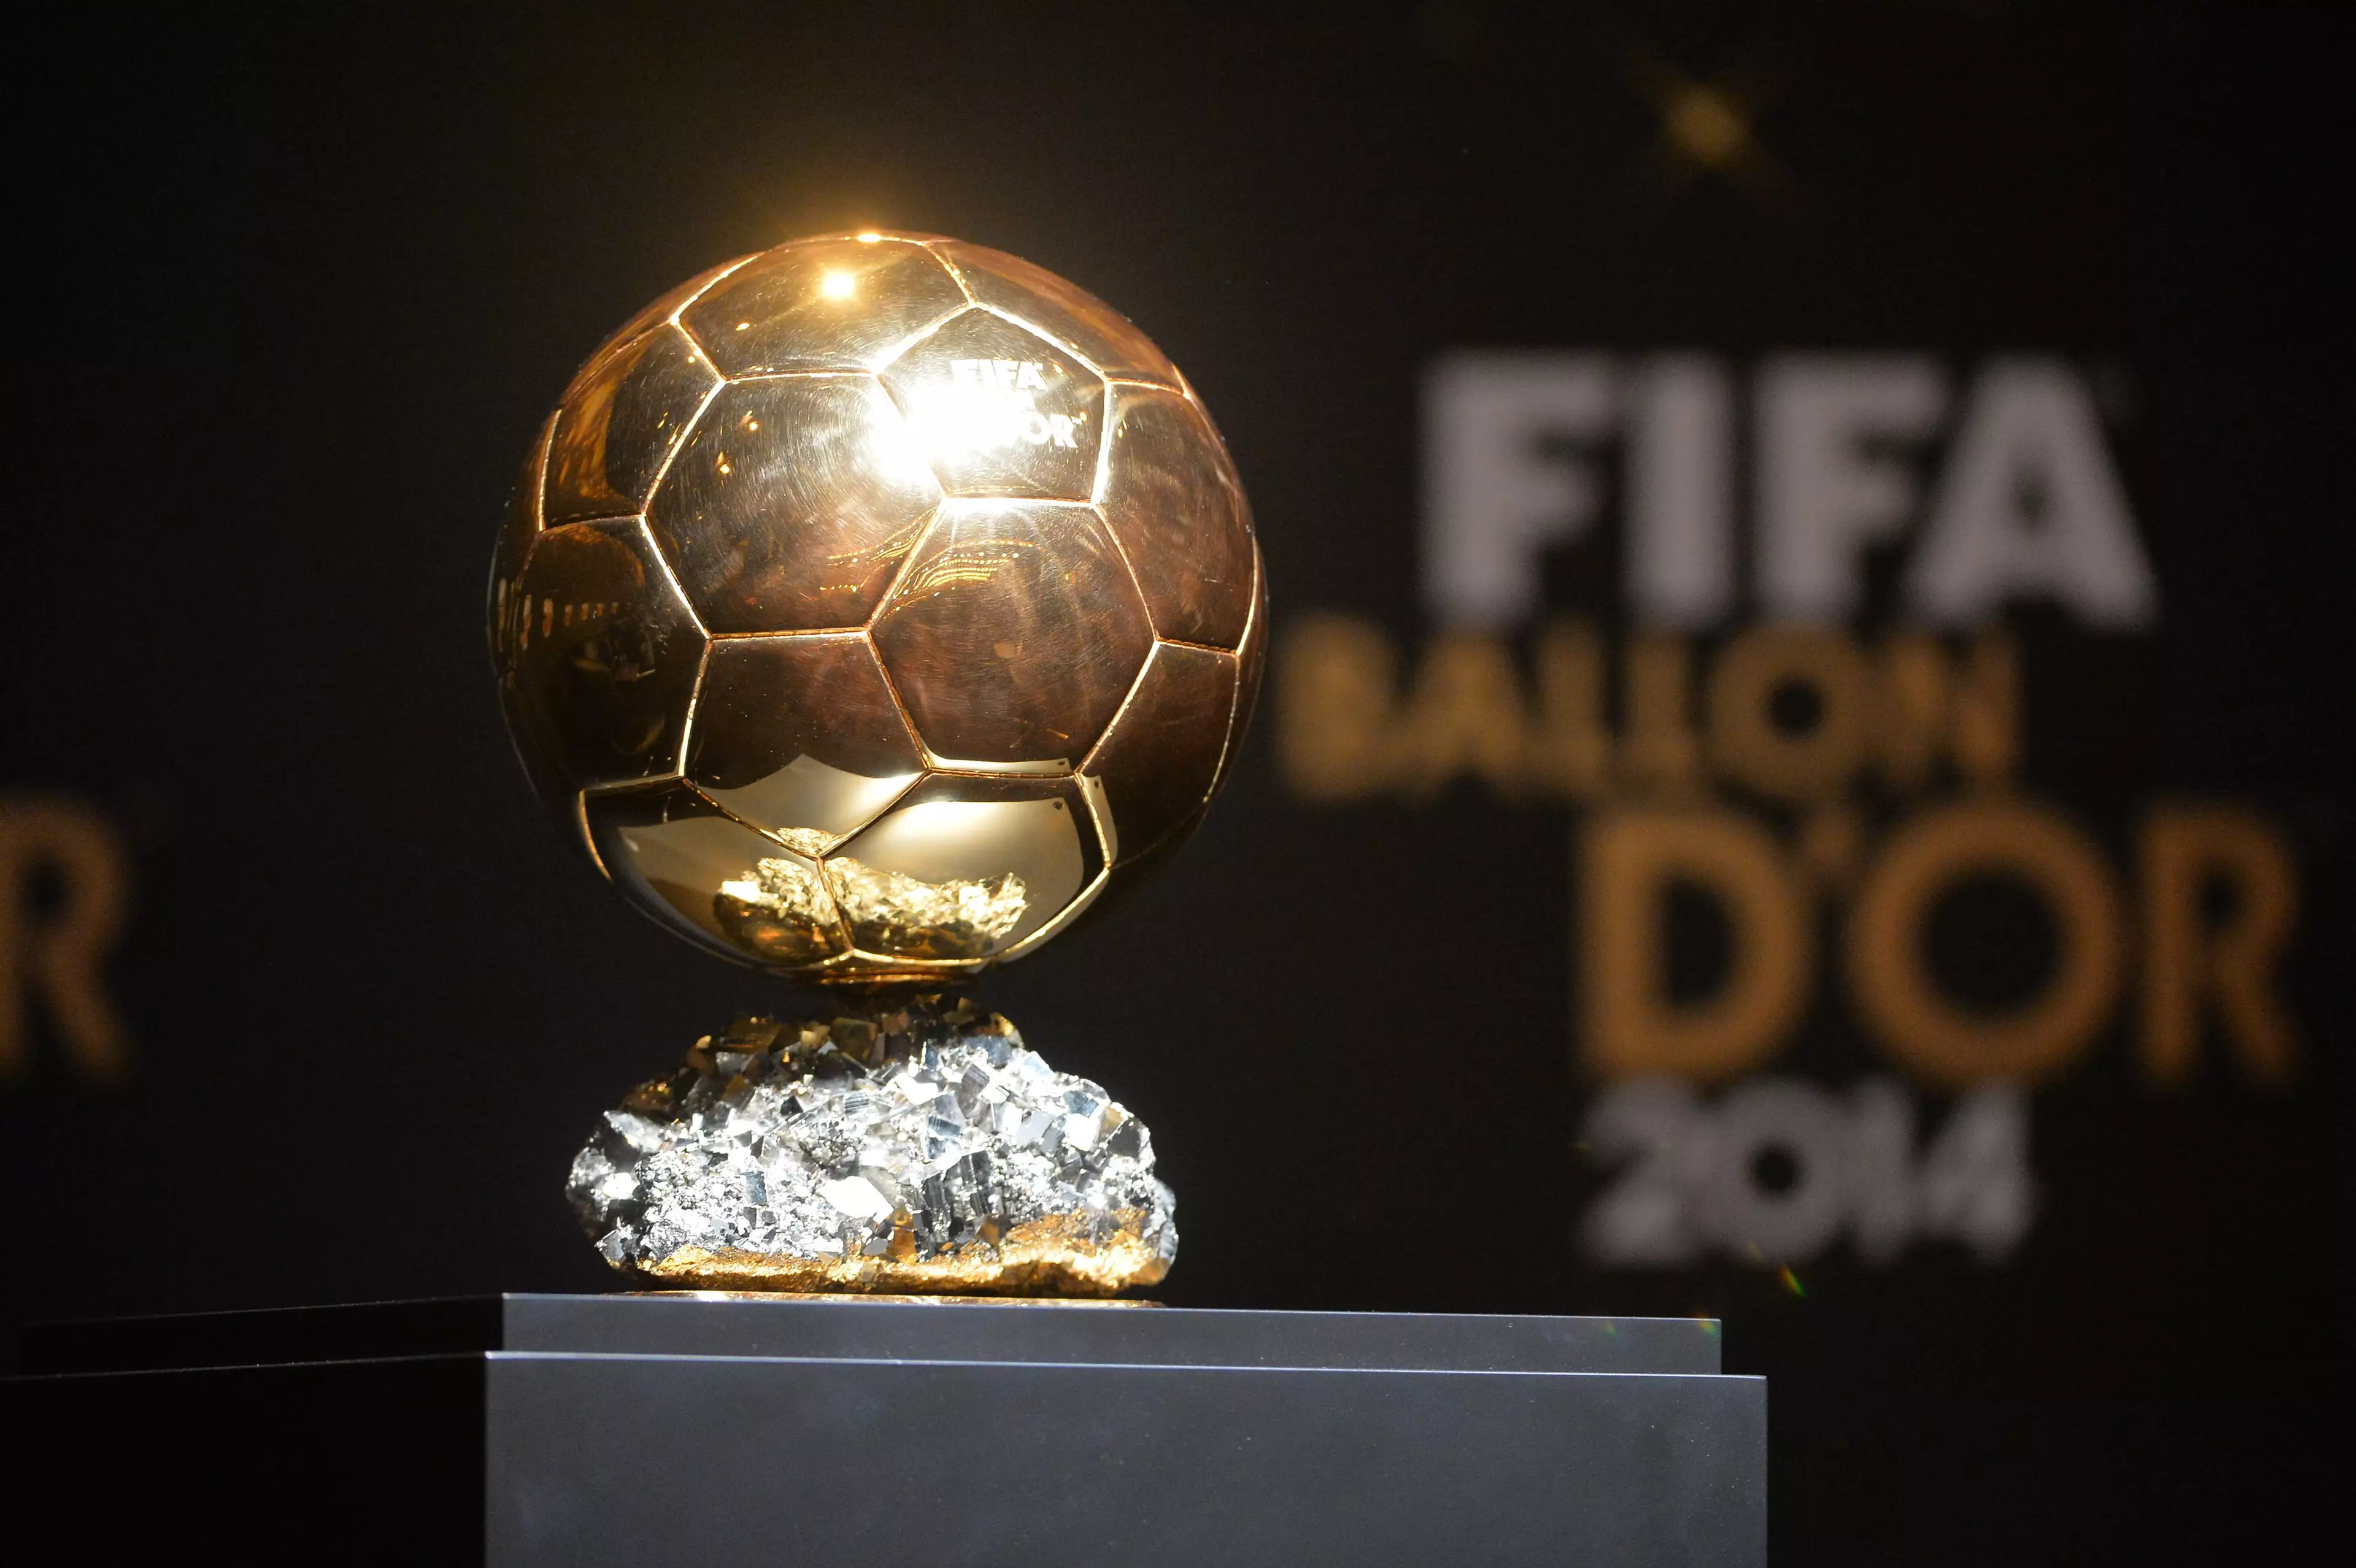 Getting his hands on a Ballon d'Or might be tricky. Image: PA Images.